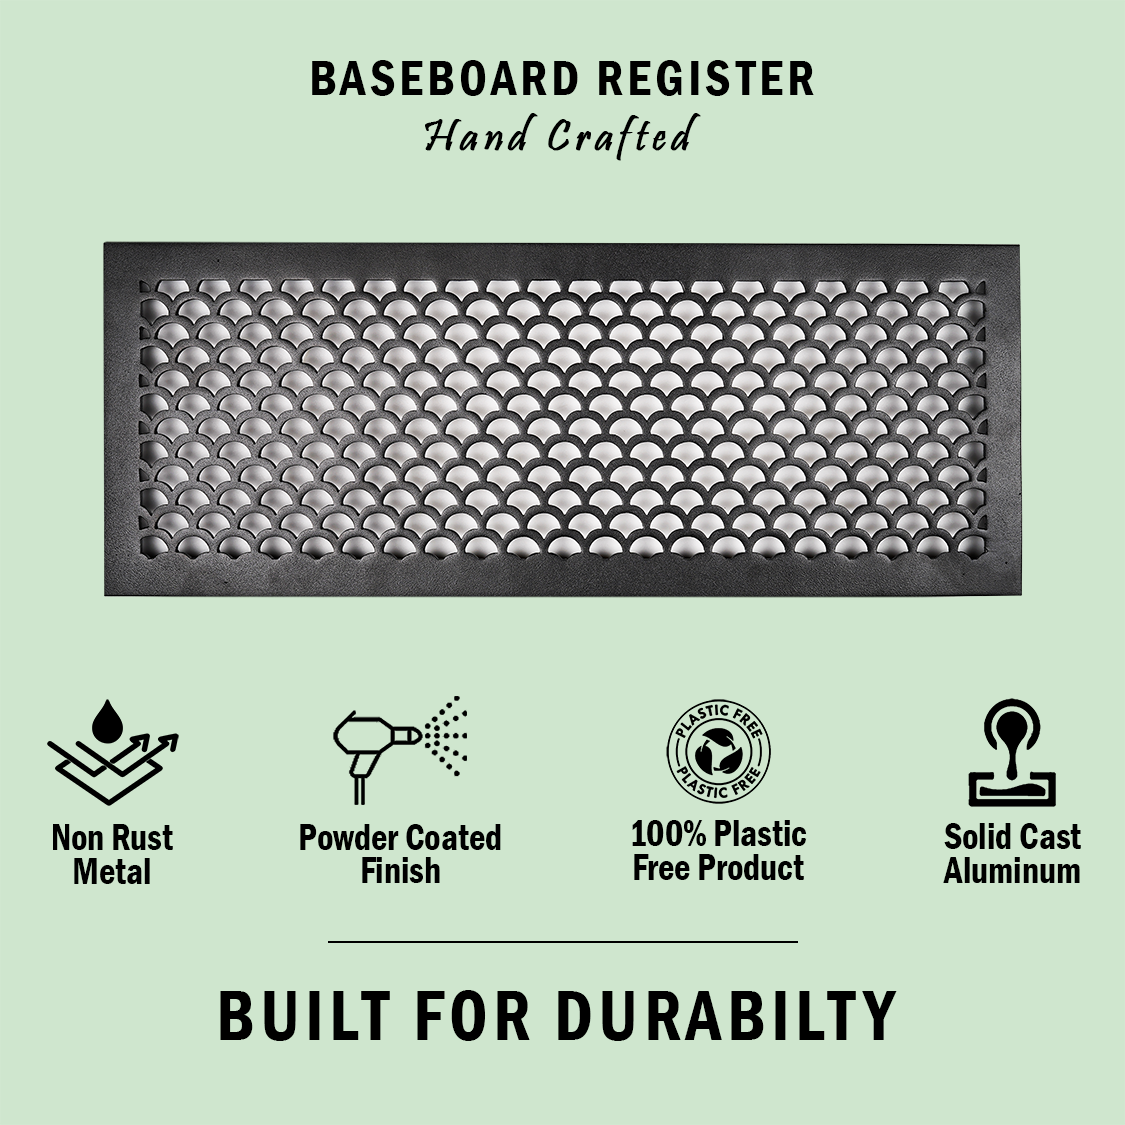 Scallop BASEBOARD 8"x30" Duct opening Solid Cast Aluminum Grill Vent Cover | Powder Coated